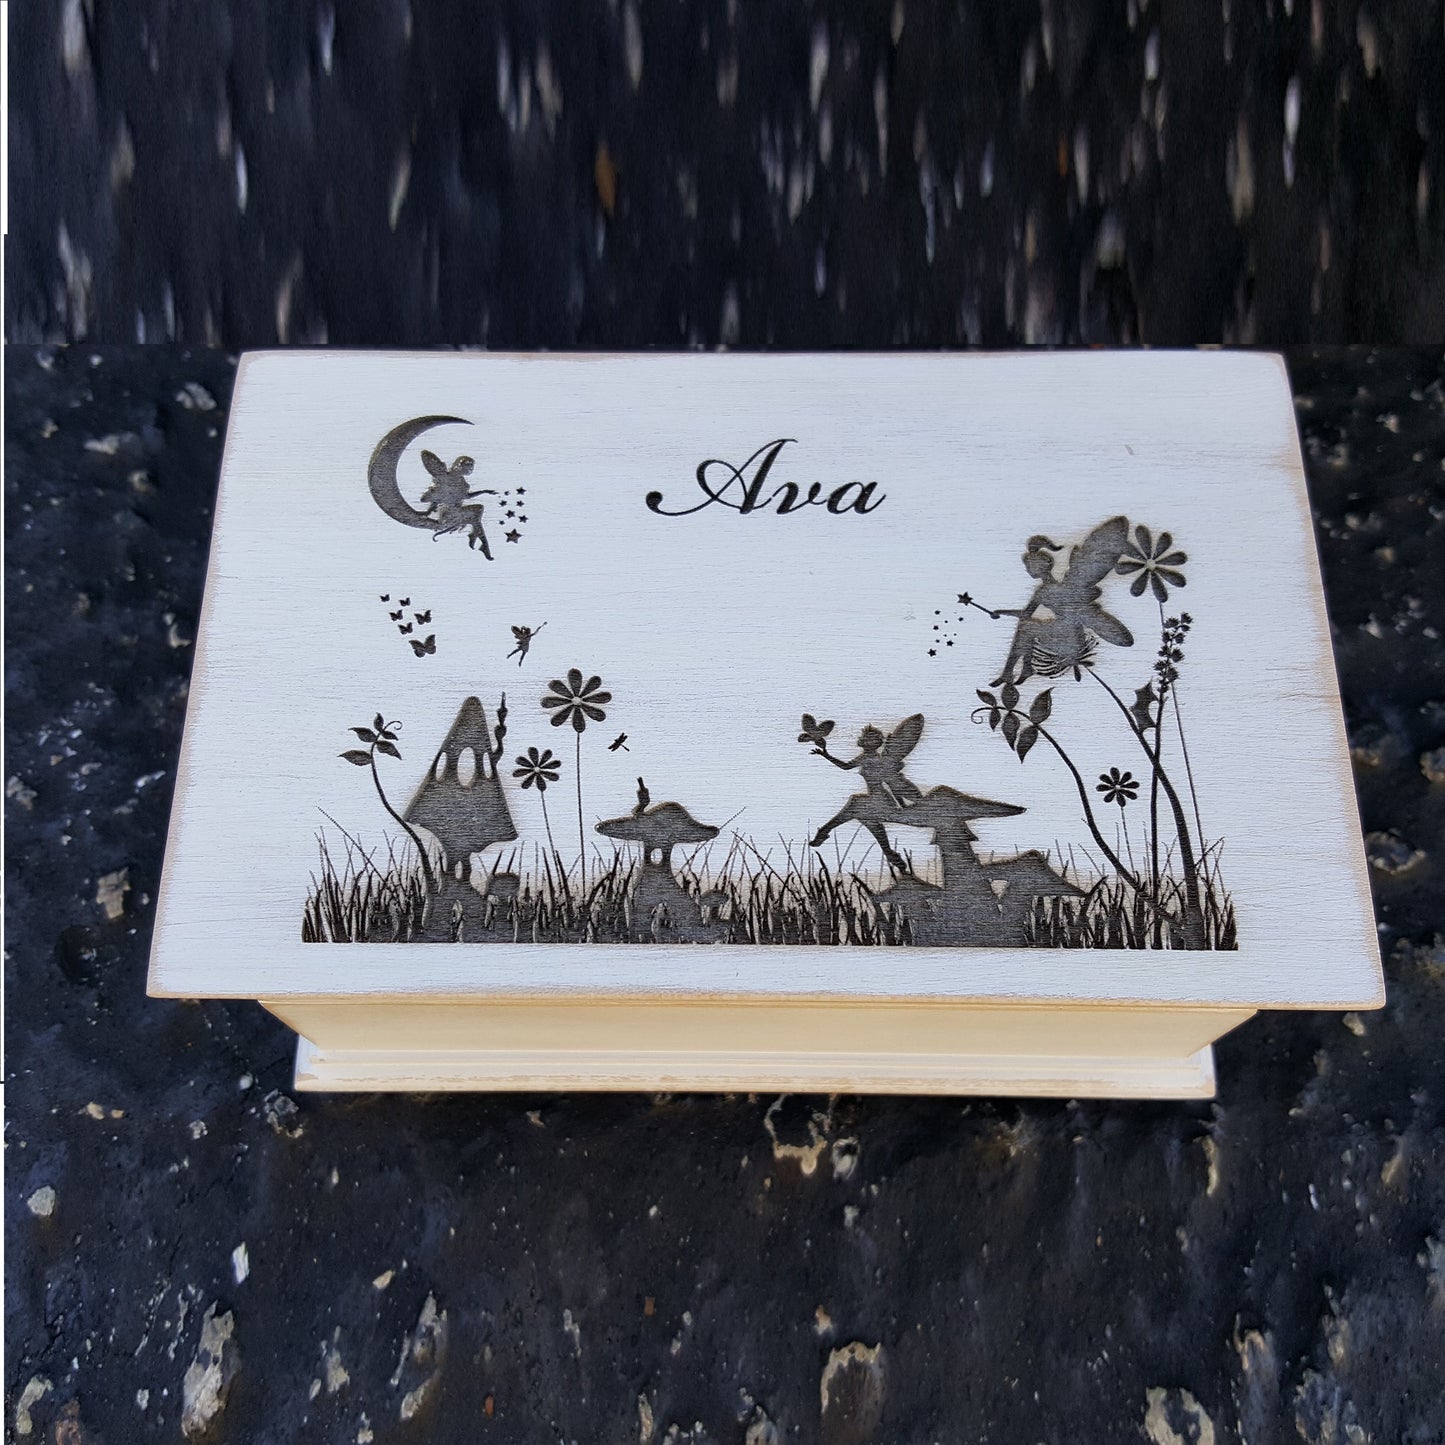 Fairy garden engraved jewelry box with name on top with built in music player